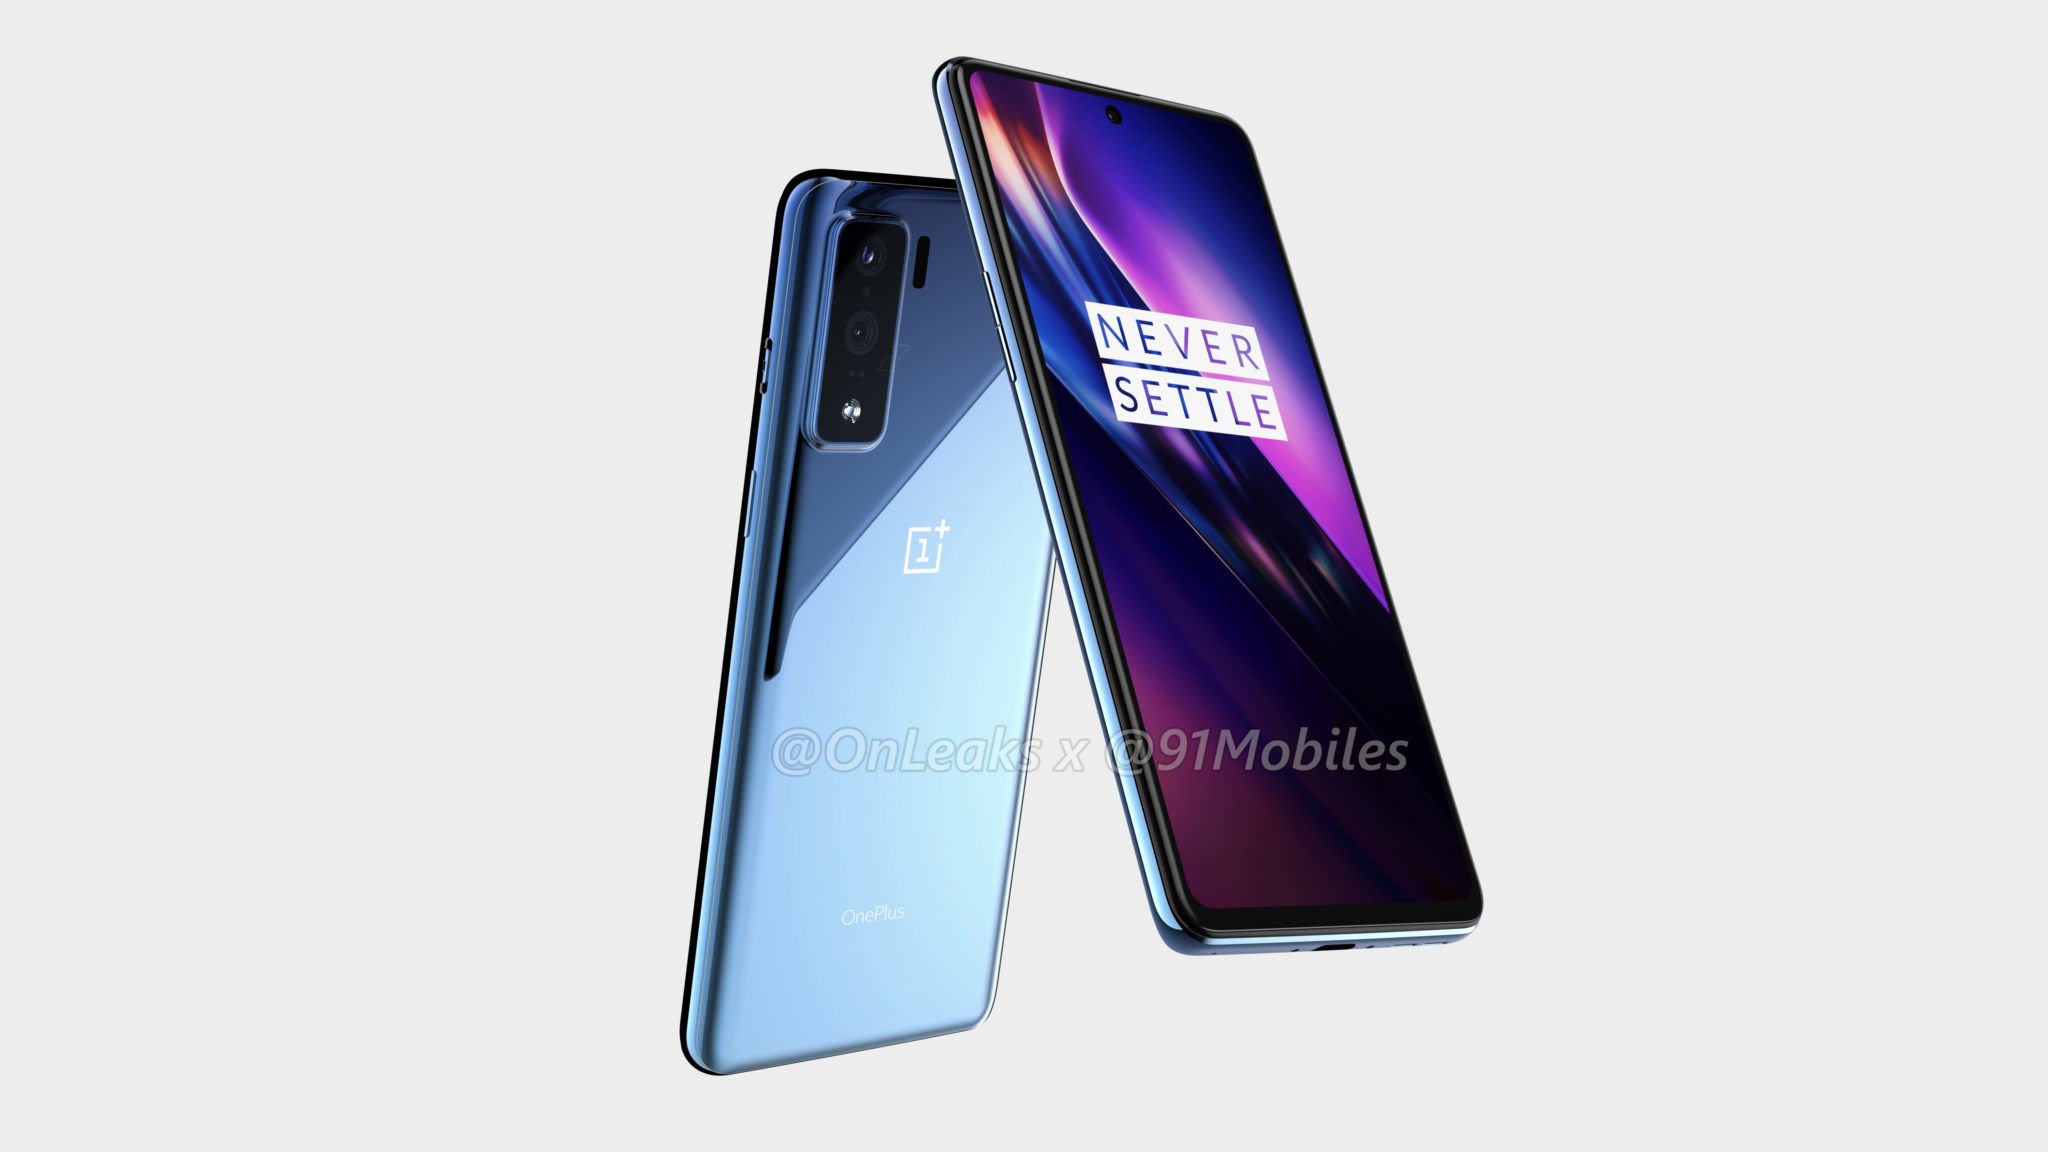 https://www.androidcentral.com/sites/androidcentral.com/files/styles/thumbnail/public/article_images/2019/12/oneplus-8-lite-render-2.jpg?itok=uH2iRaGc